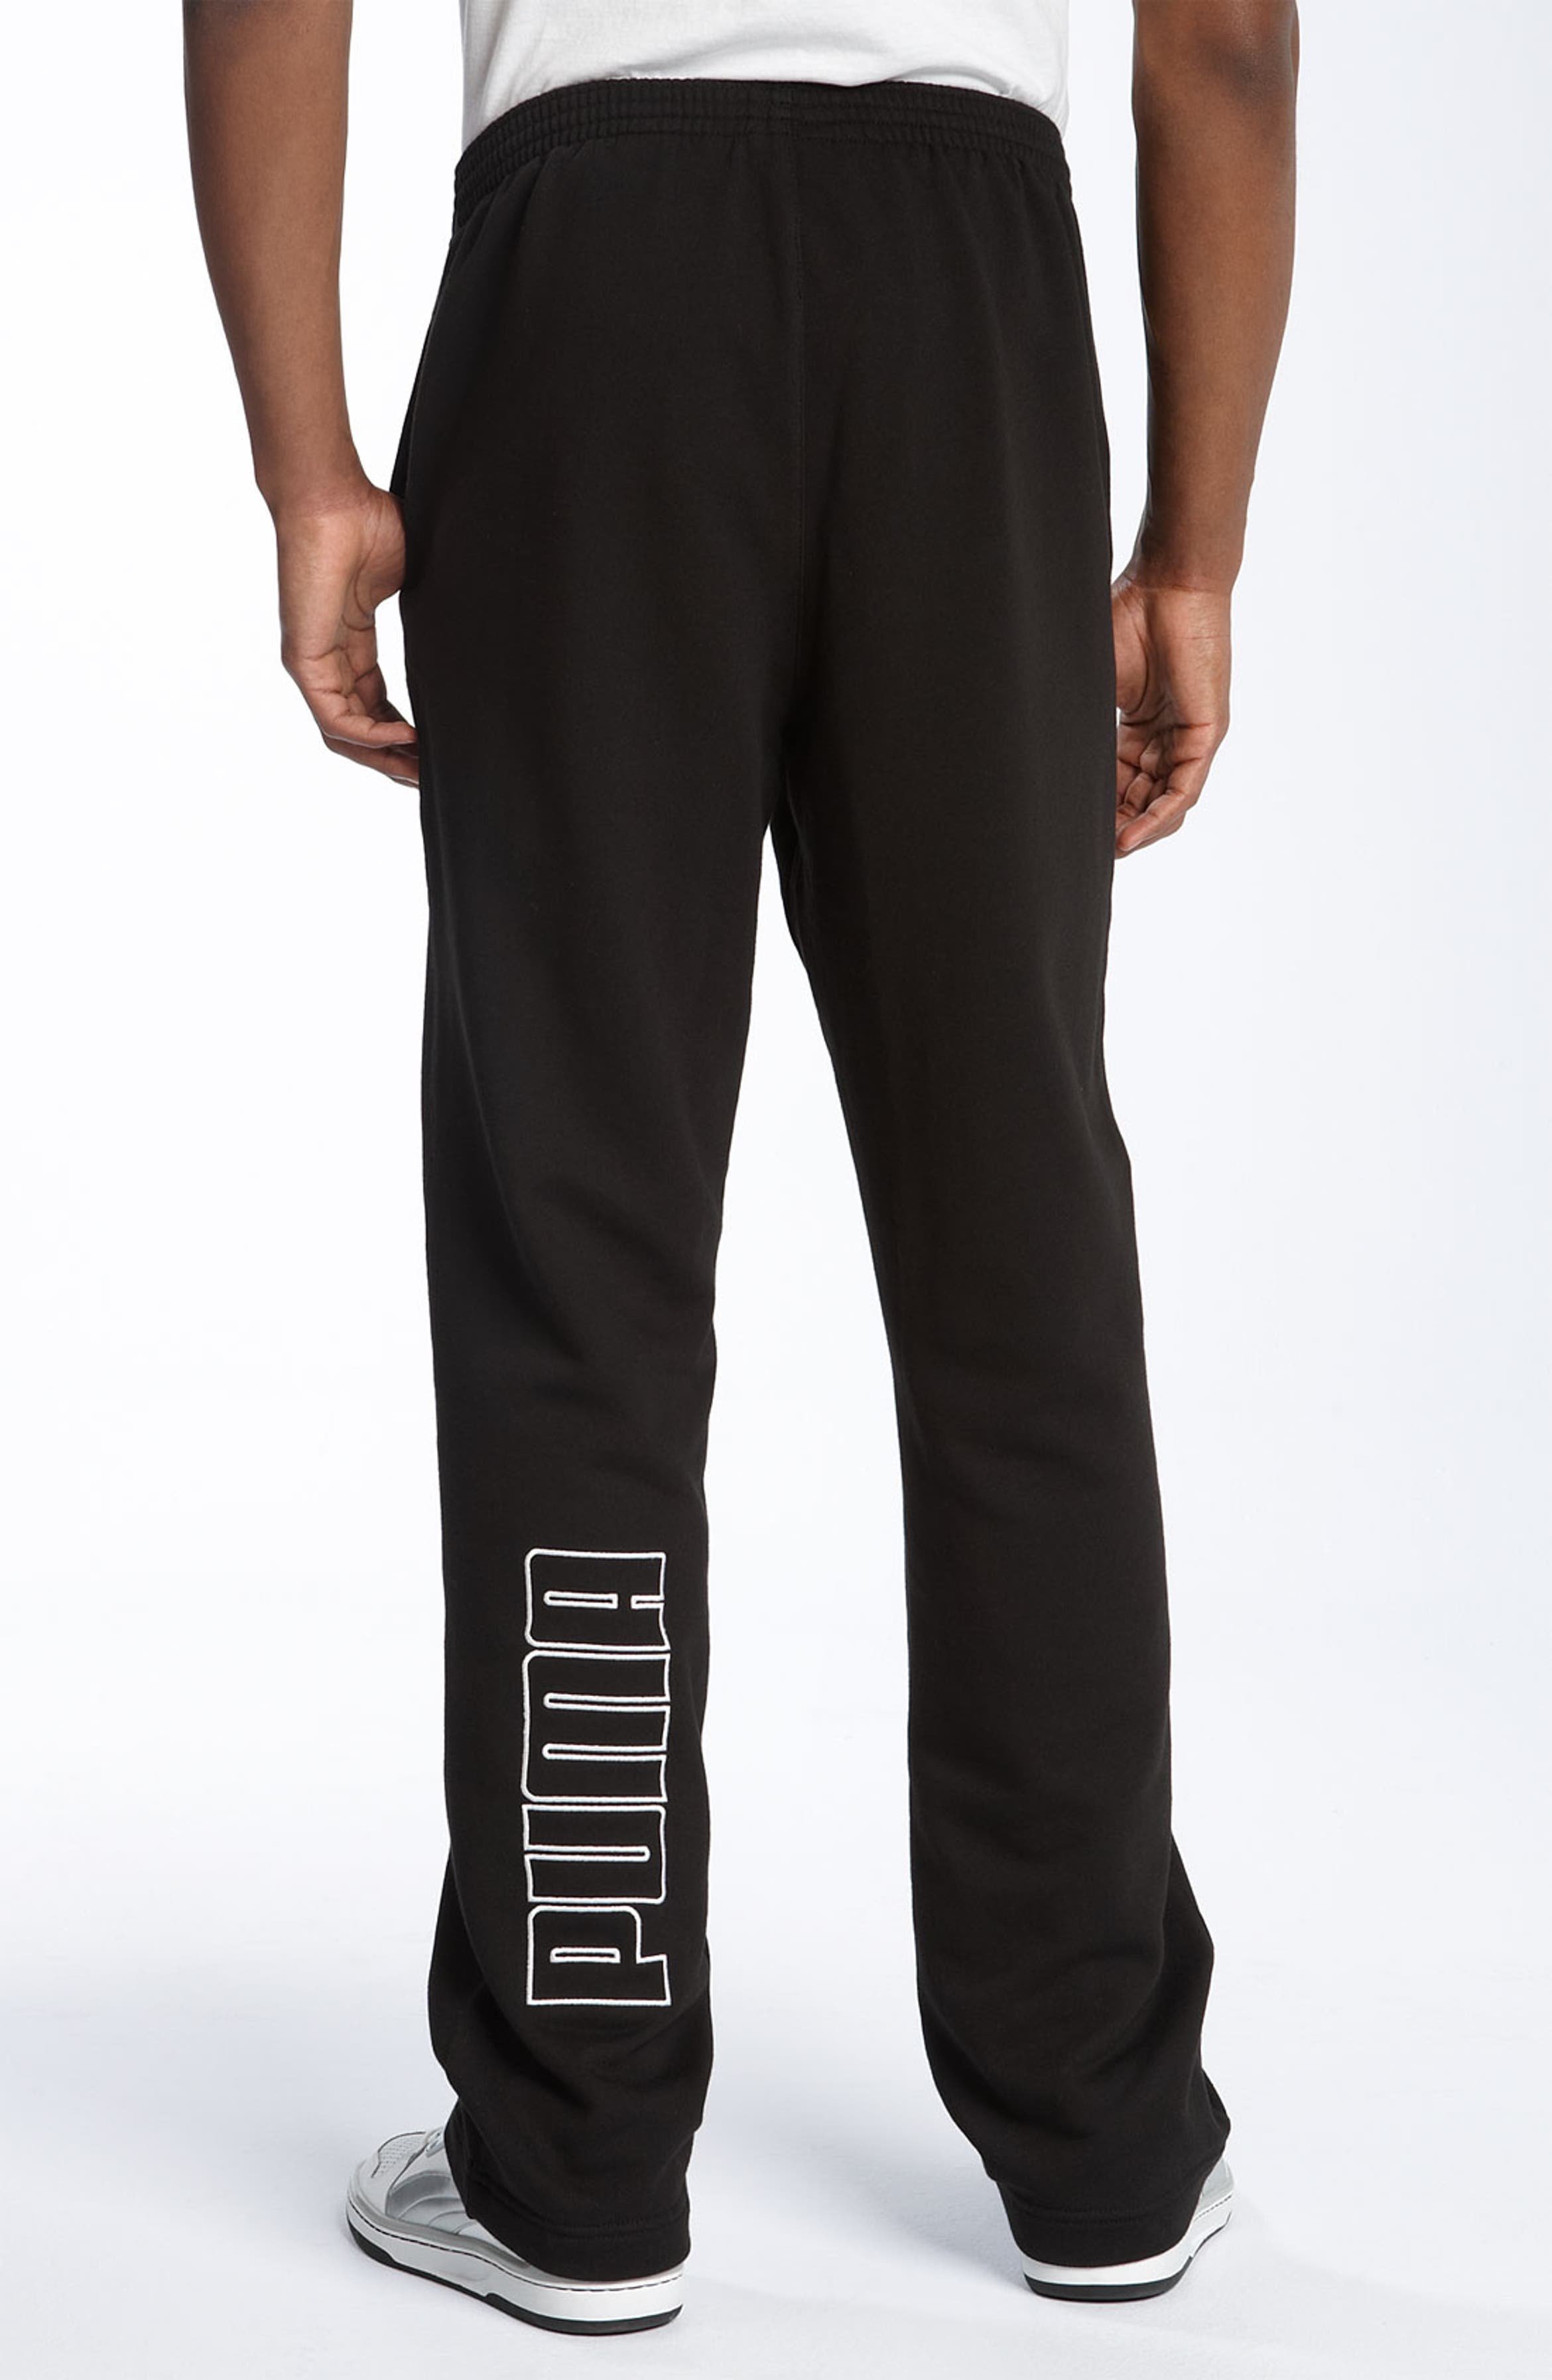 Puma French Terry Pants | Nordstrom